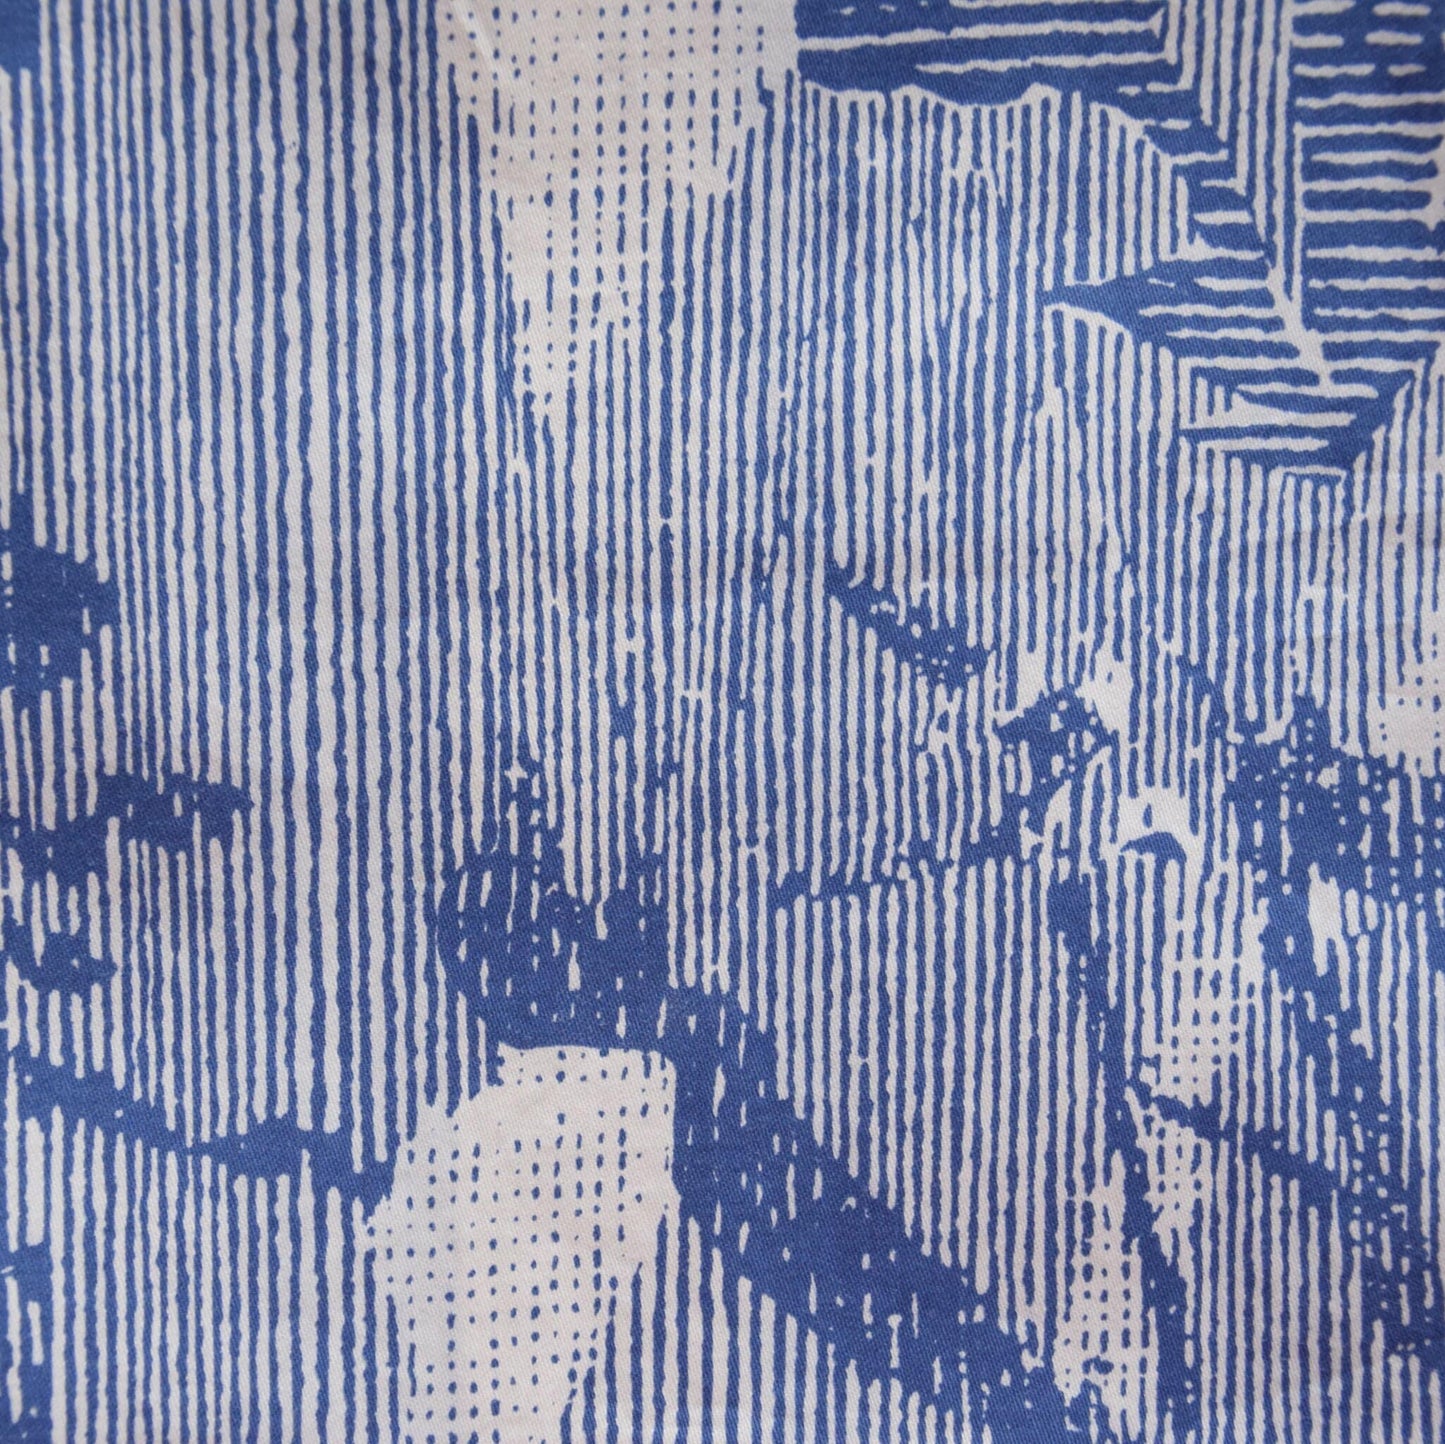 Upcycling cotton fabric with white and blue abstract pattern